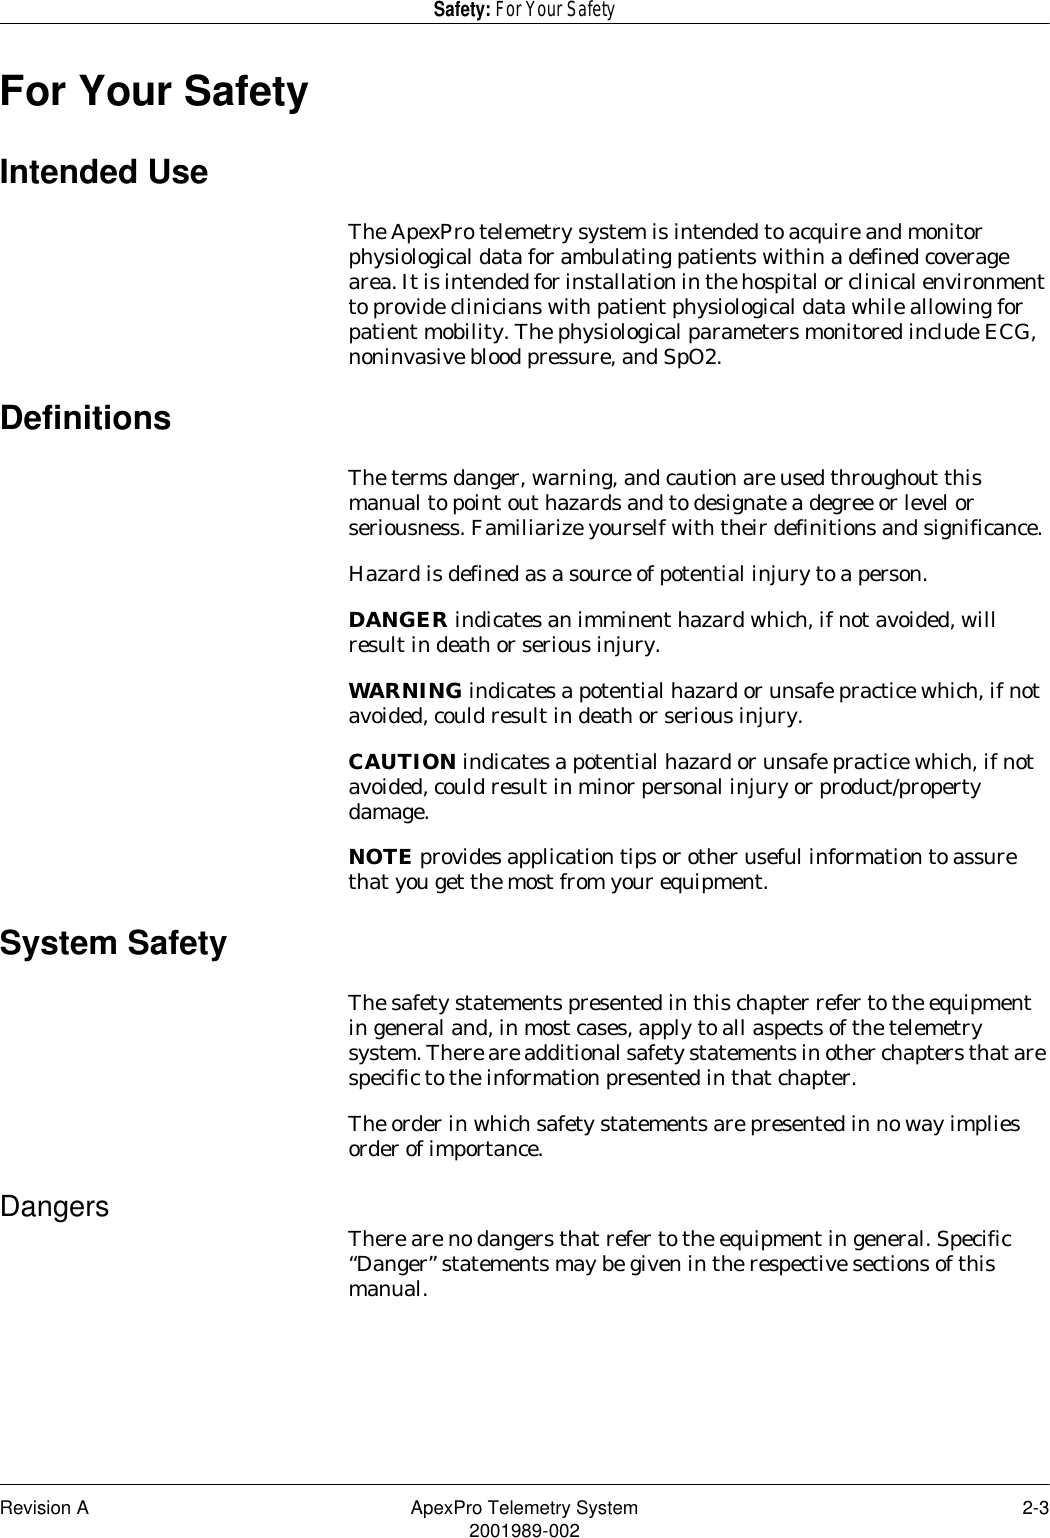 Revision A ApexPro Telemetry System 2-32001989-002Safety: For Your SafetyFor Your SafetyIntended UseThe ApexPro telemetry system is intended to acquire and monitor physiological data for ambulating patients within a defined coverage area. It is intended for installation in the hospital or clinical environment to provide clinicians with patient physiological data while allowing for patient mobility. The physiological parameters monitored include ECG, noninvasive blood pressure, and SpO2.DefinitionsThe terms danger, warning, and caution are used throughout this manual to point out hazards and to designate a degree or level or seriousness. Familiarize yourself with their definitions and significance.Hazard is defined as a source of potential injury to a person.DANGER indicates an imminent hazard which, if not avoided, will result in death or serious injury.WARNING indicates a potential hazard or unsafe practice which, if not avoided, could result in death or serious injury.CAUTION indicates a potential hazard or unsafe practice which, if not avoided, could result in minor personal injury or product/property damage.NOTE provides application tips or other useful information to assure that you get the most from your equipment.System SafetyThe safety statements presented in this chapter refer to the equipment in general and, in most cases, apply to all aspects of the telemetry system. There are additional safety statements in other chapters that are specific to the information presented in that chapter.The order in which safety statements are presented in no way implies order of importance.Dangers There are no dangers that refer to the equipment in general. Specific “Danger” statements may be given in the respective sections of this manual.